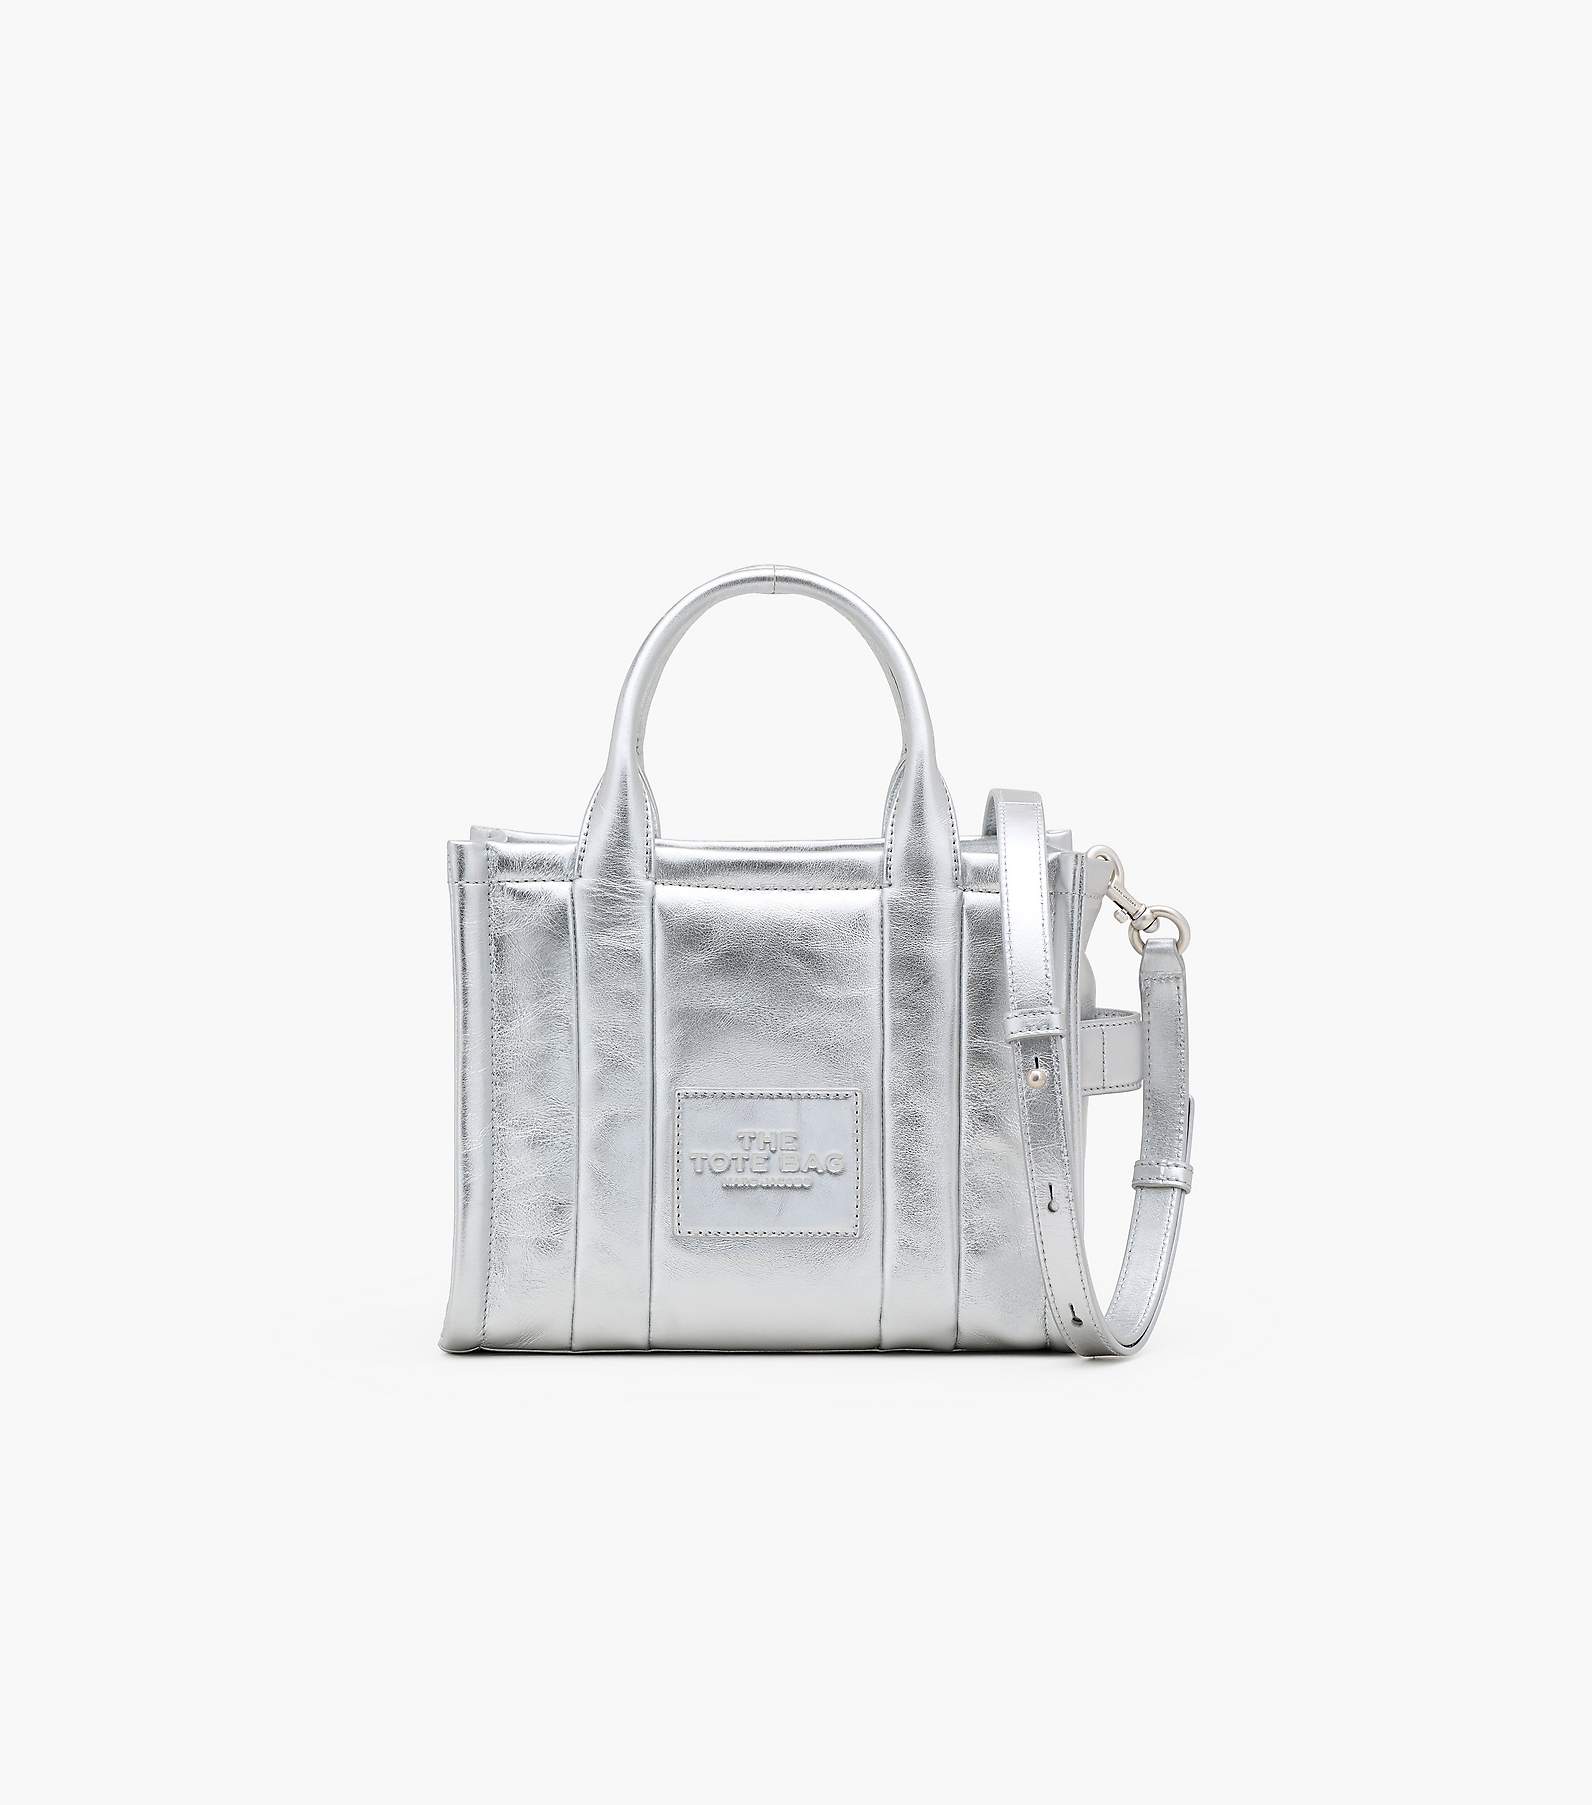 The Metallic Leather Small Tote Bag, Marc Jacobs